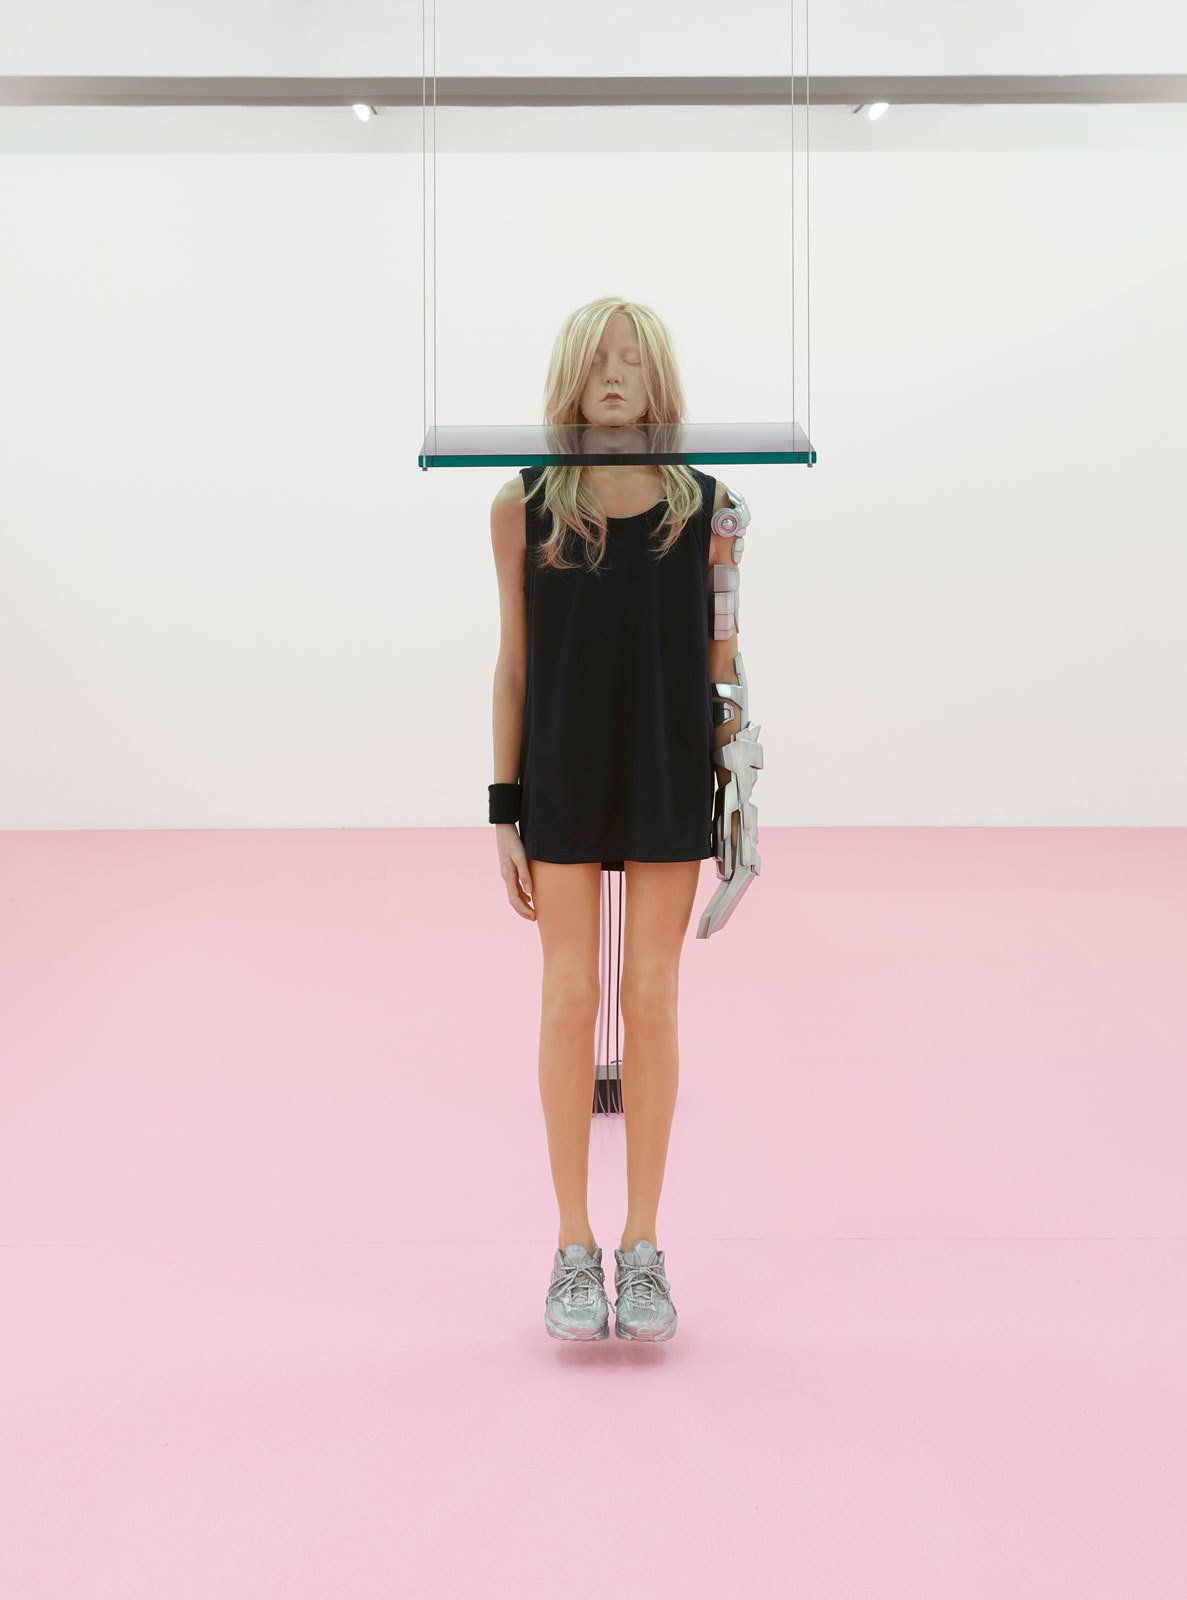 Andro WekuaUntitled, 2014Synthetic hair, silicone, wax, polymer plaster, PU foam, steel, glass, synthetic rope, aluminum cast, fabric, motors, electronics, and mechanicsInstallation view, K&ouml;lnischer Kunstverein, 2016Photo: Simon VogelCourtesy of the artist and Gladstone Gallery, New York and Brussels&copy; Andro Wekua